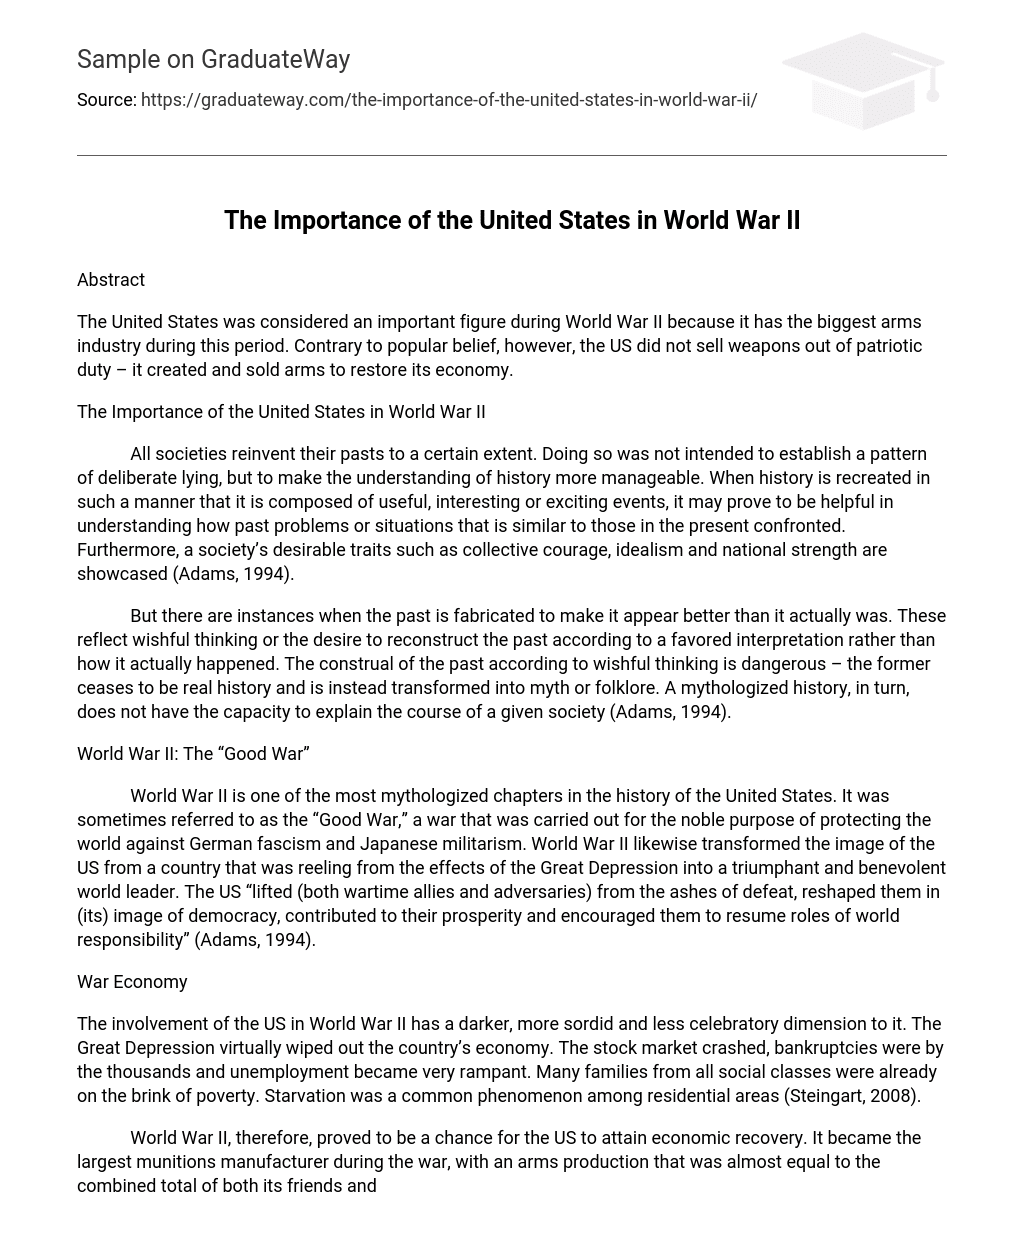 The Importance of the United States in World War II